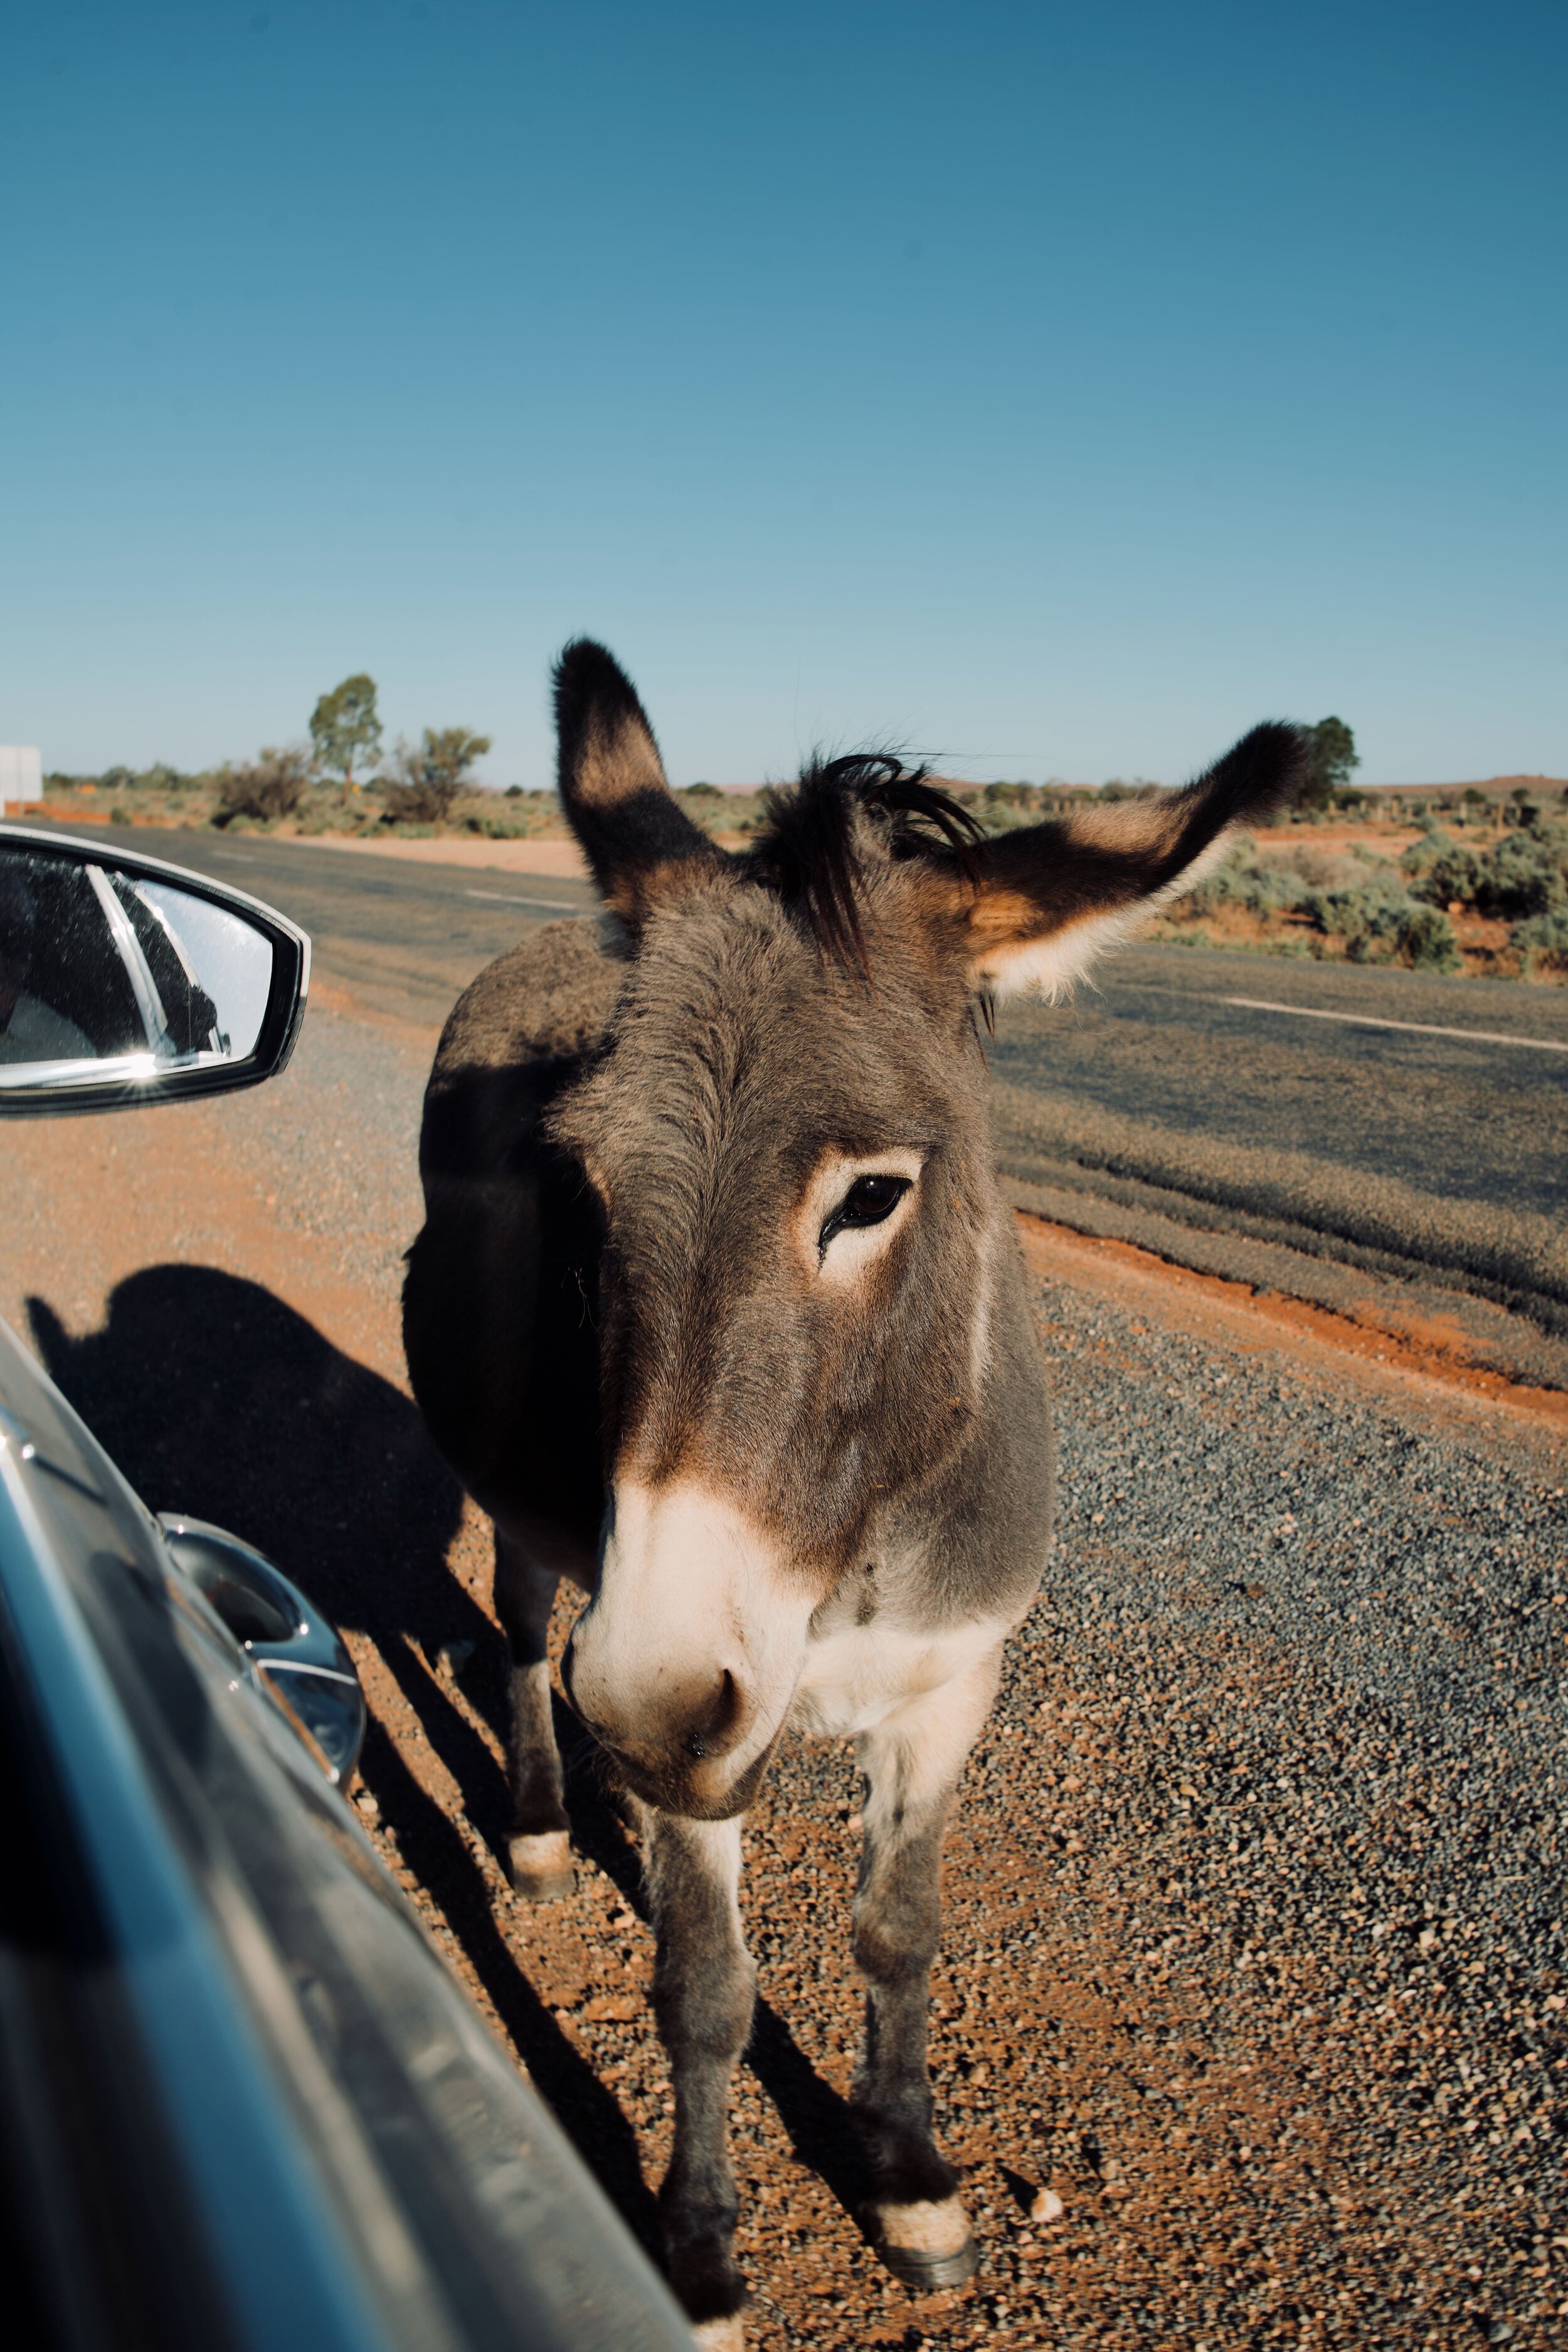 Donkey on road in Silverton, outback NSW